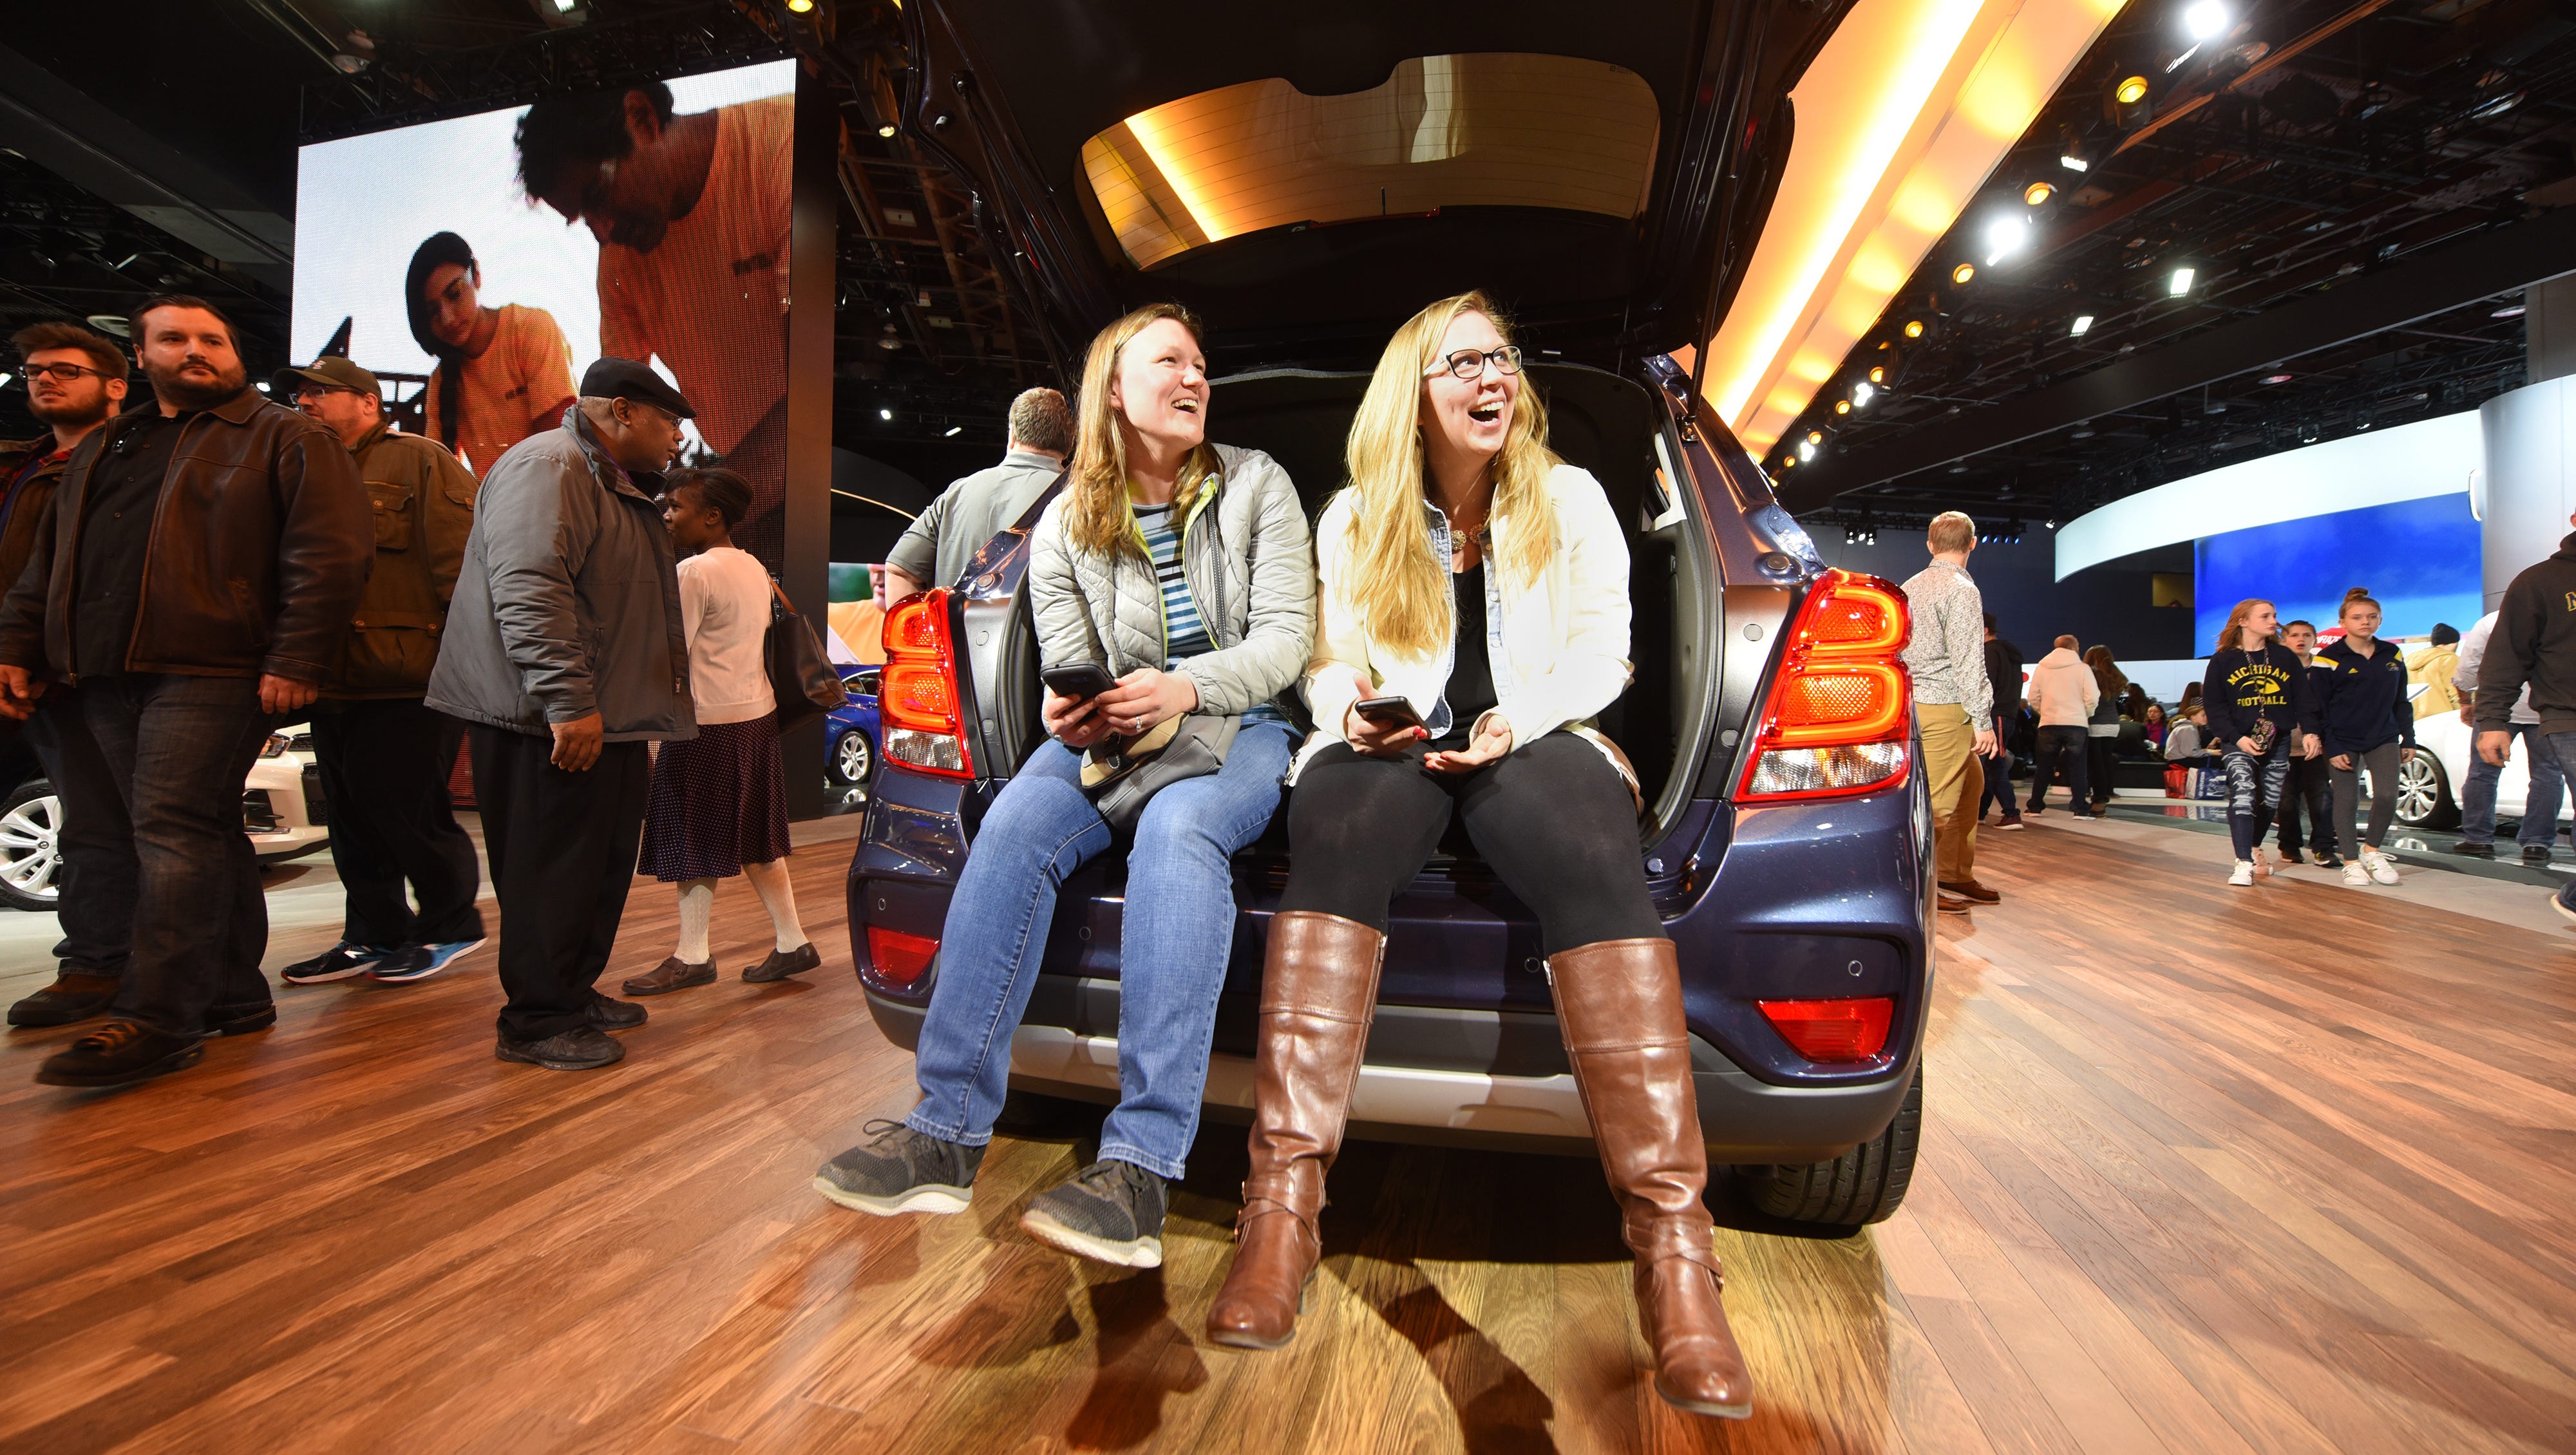 Liz Connolly (left), of Franklin, and Catherine Tippman, of Berkely, share a moment inside the hatchback of a 2018 Chevrolet Trax Premier on Saturday January 20, 2018 for the first public day for the North American International Auto Show